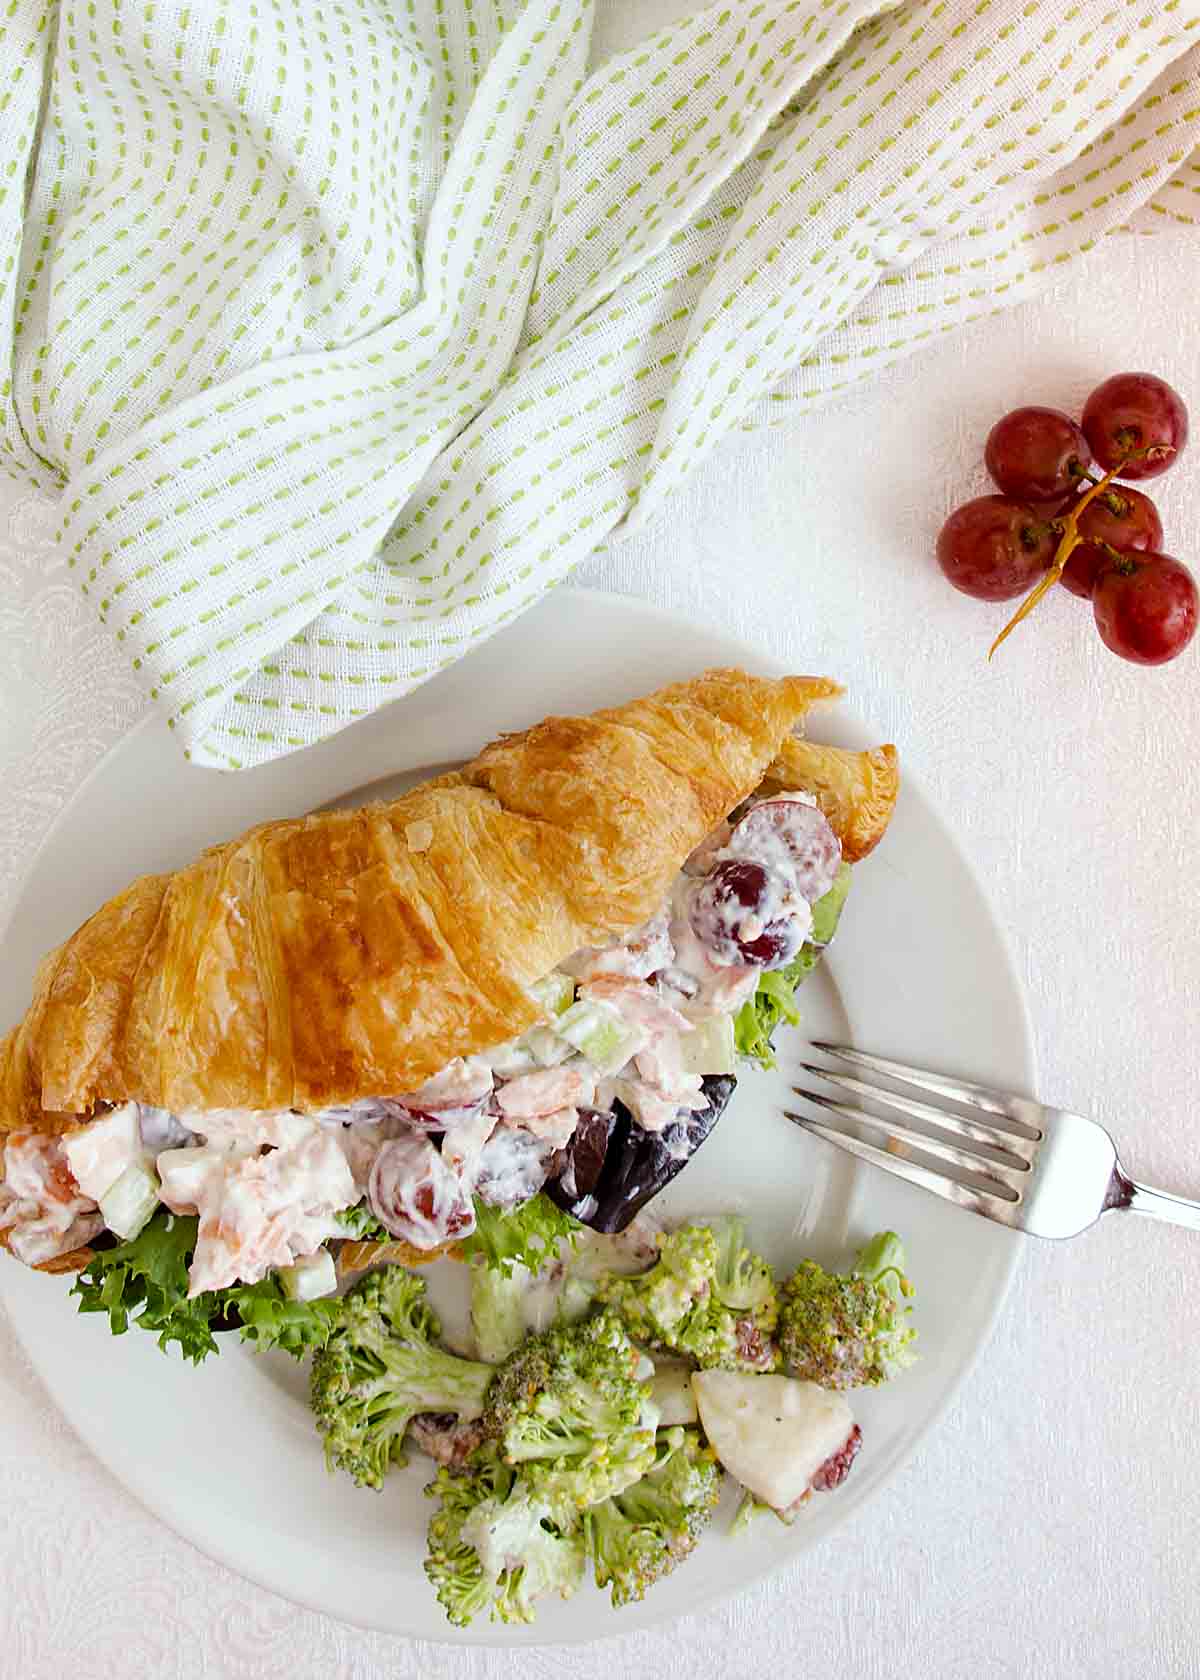 Salmon Salad with Grapes & Pecans updates a classic chicken salad. Serve as a sandwich or salad for lunch, brunch, shower or dinner.